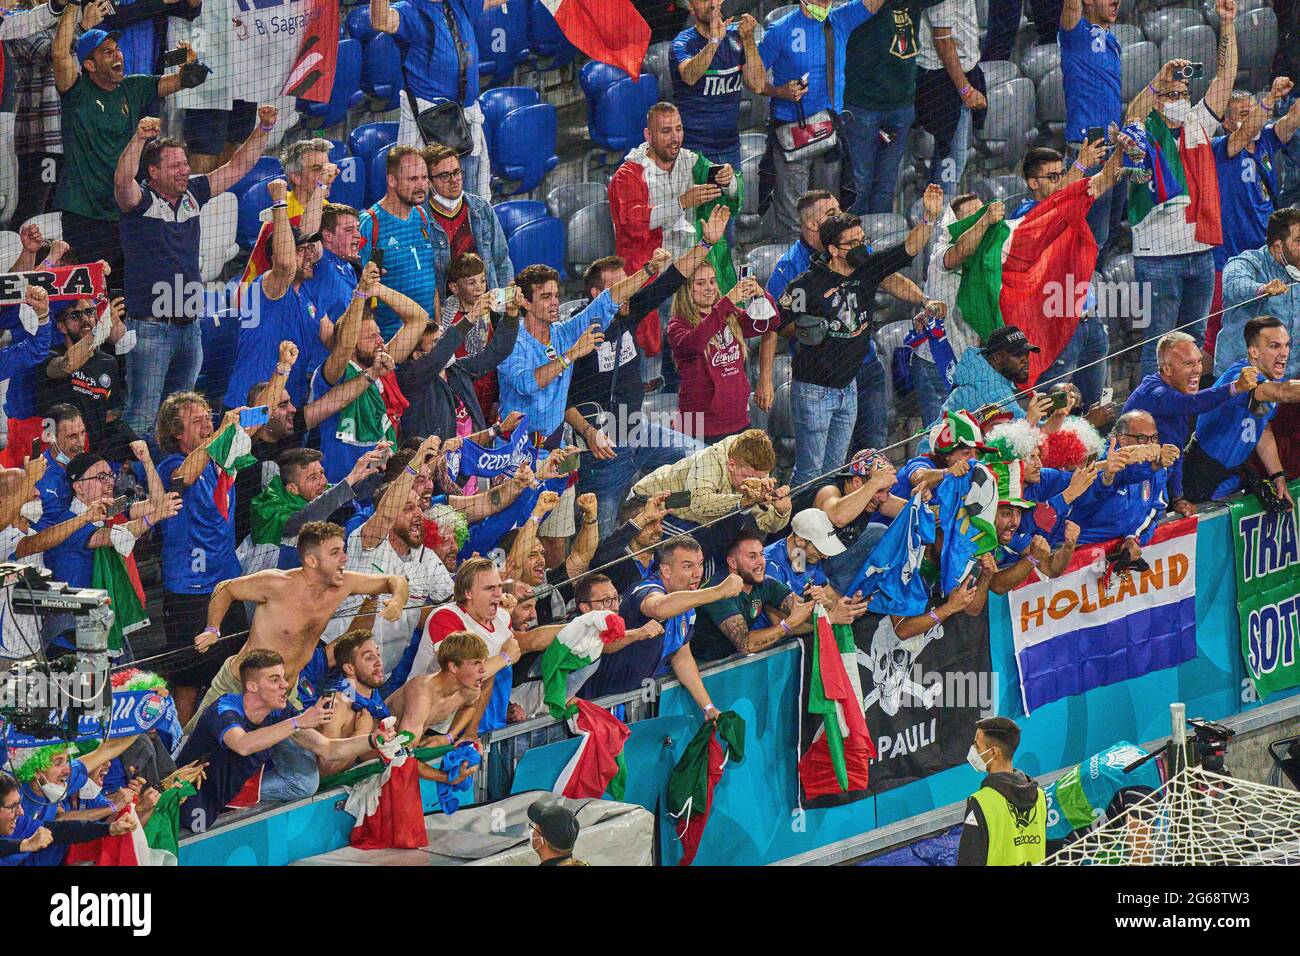 Italian fans celebrate their team in the quarterfinal match BELGIUM - ITALY 1-2 at the football UEFA European Championships 2020 in Season 2020/2021 on July 02, 2021  in Munich, Germany. © Peter Schatz / Alamy Live News Stock Photo